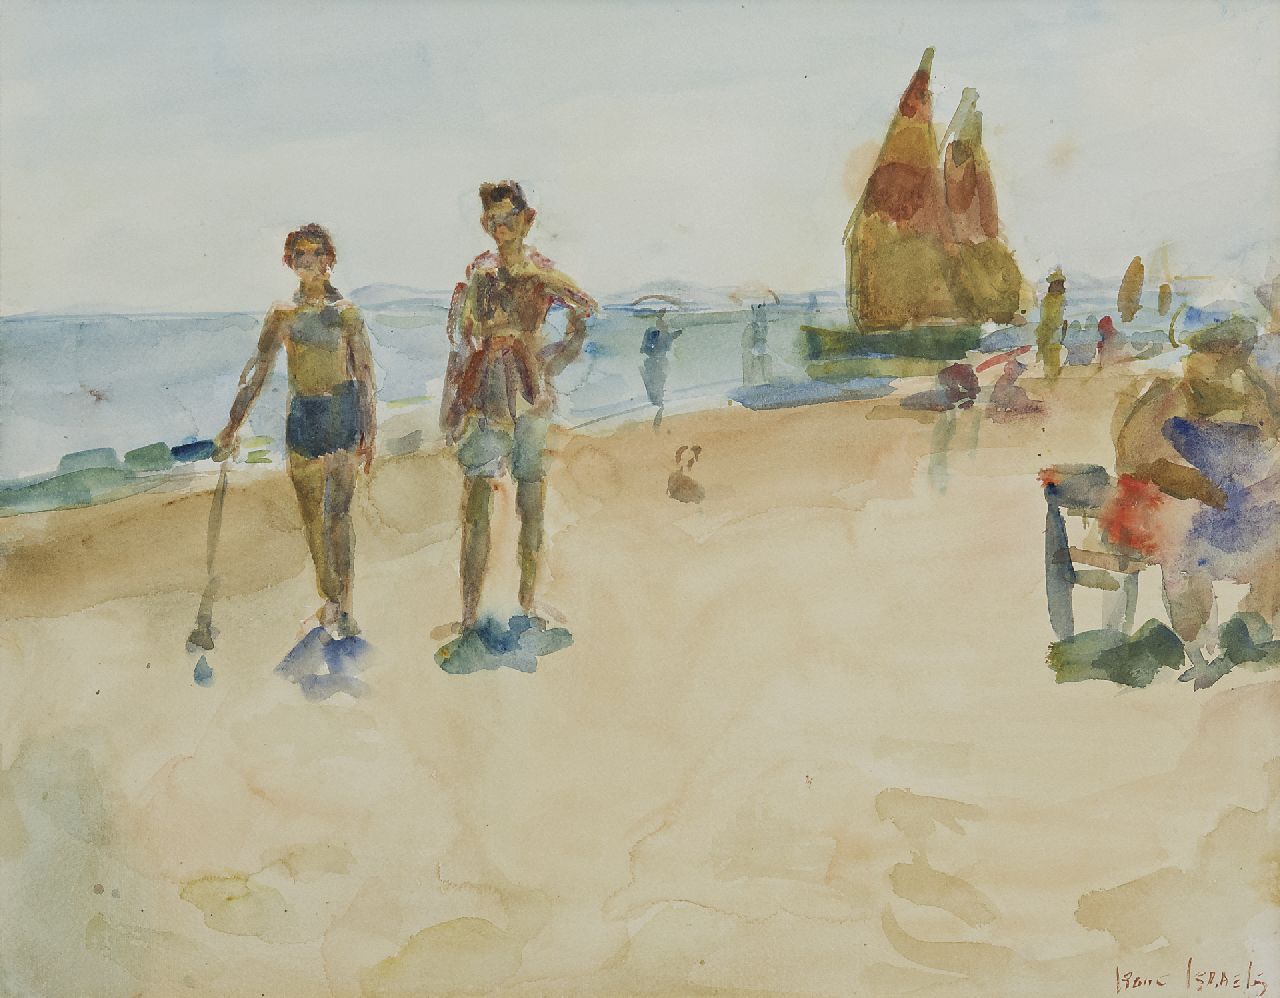 Israels I.L.  | 'Isaac' Lazarus Israels, Beach scene, Italy, watercolour on paper 38.5 x 48.9 cm, signed l.r.